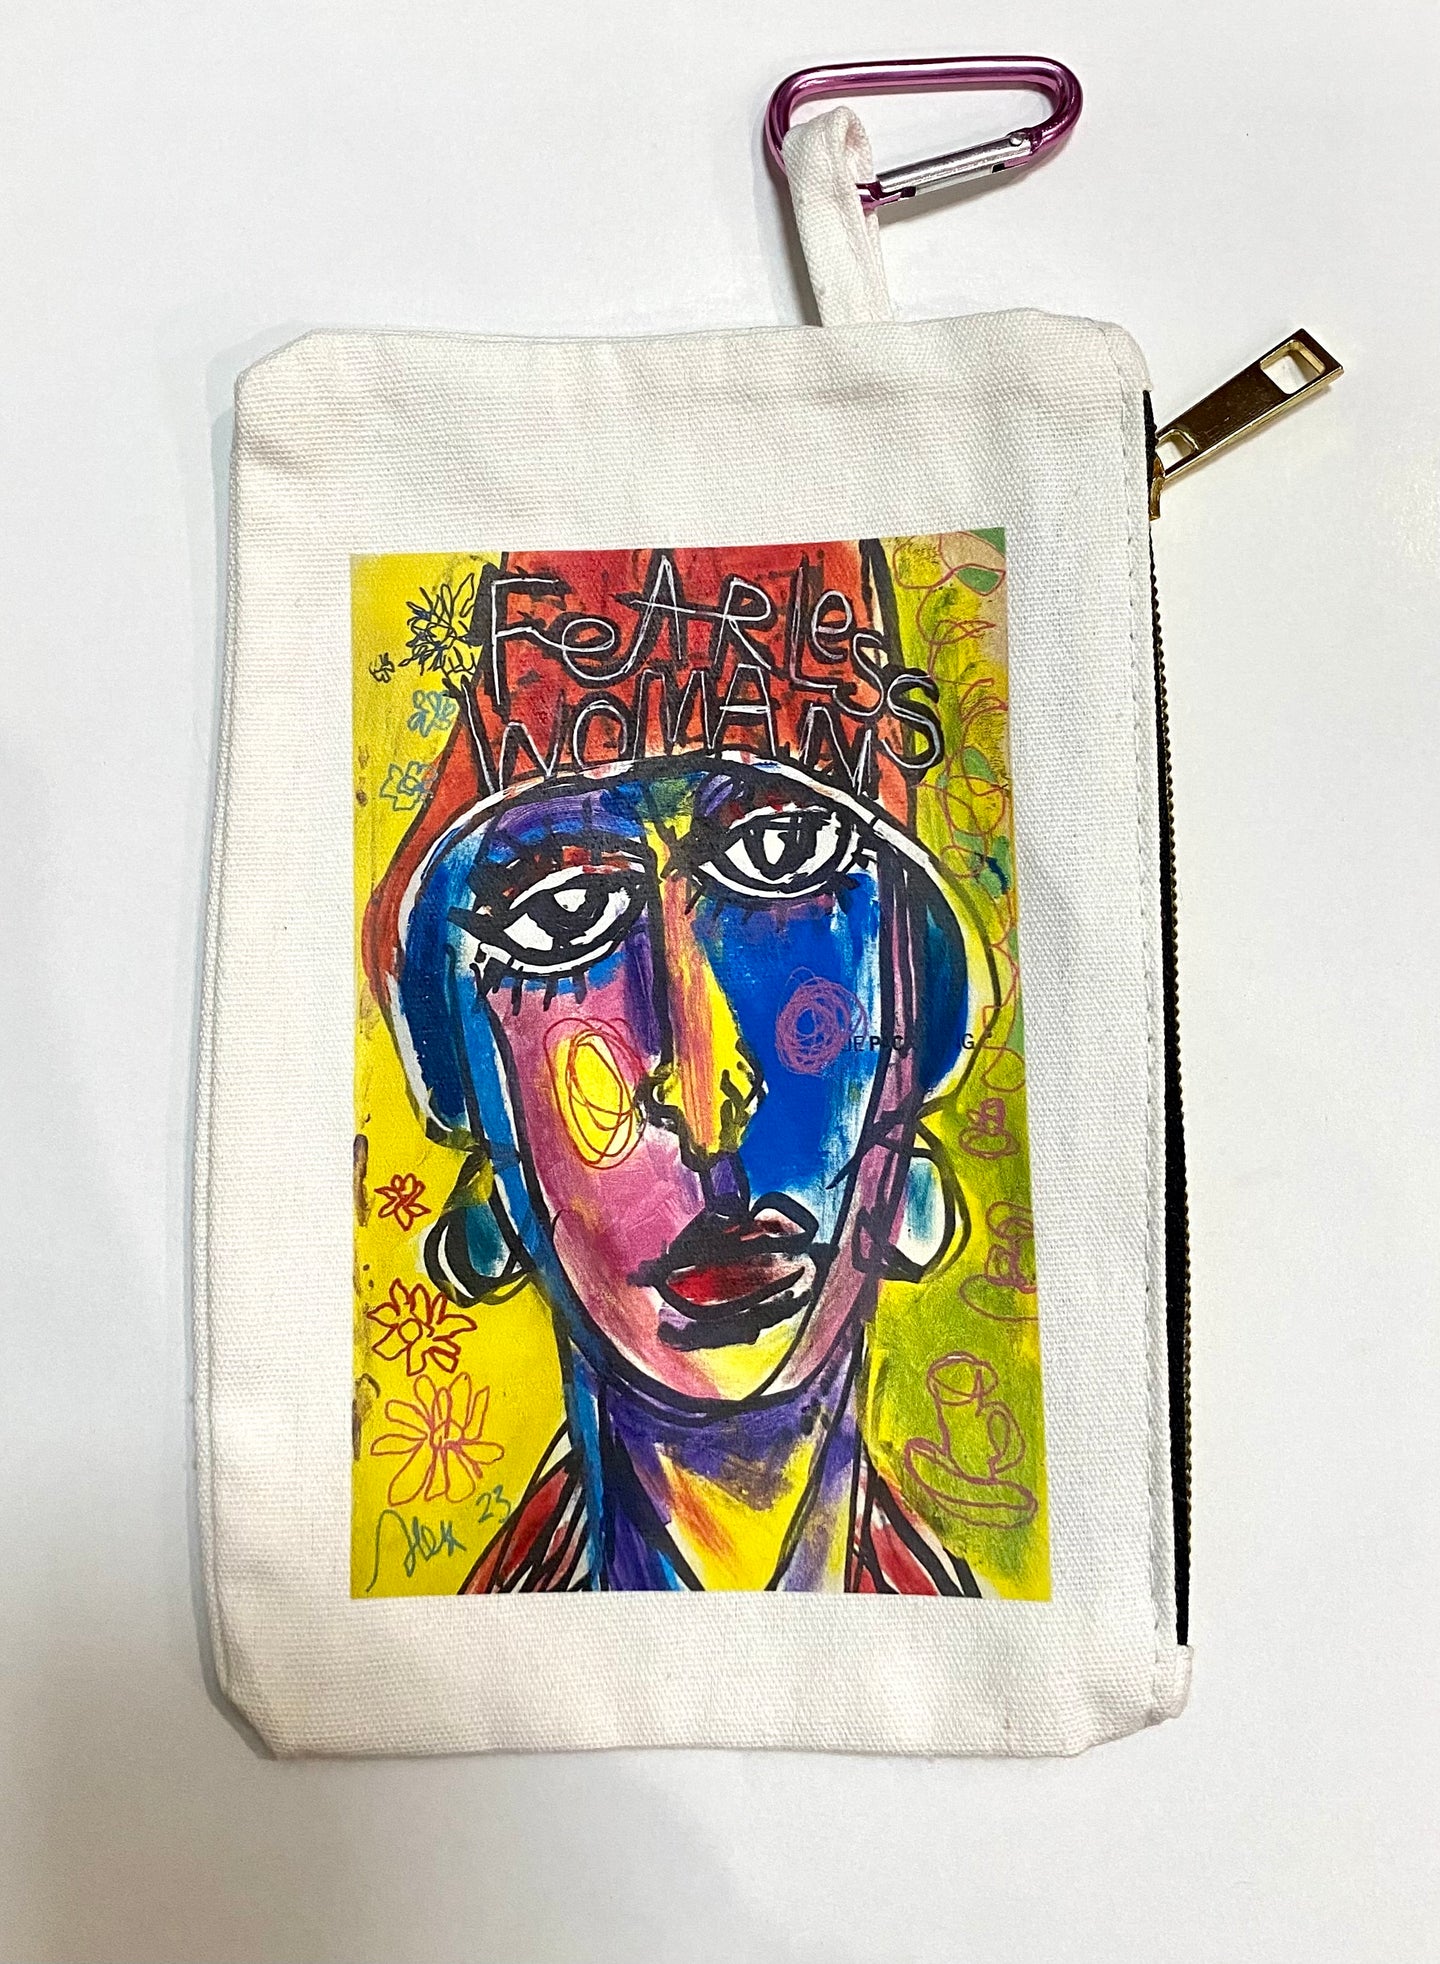 Fearless woman pouch